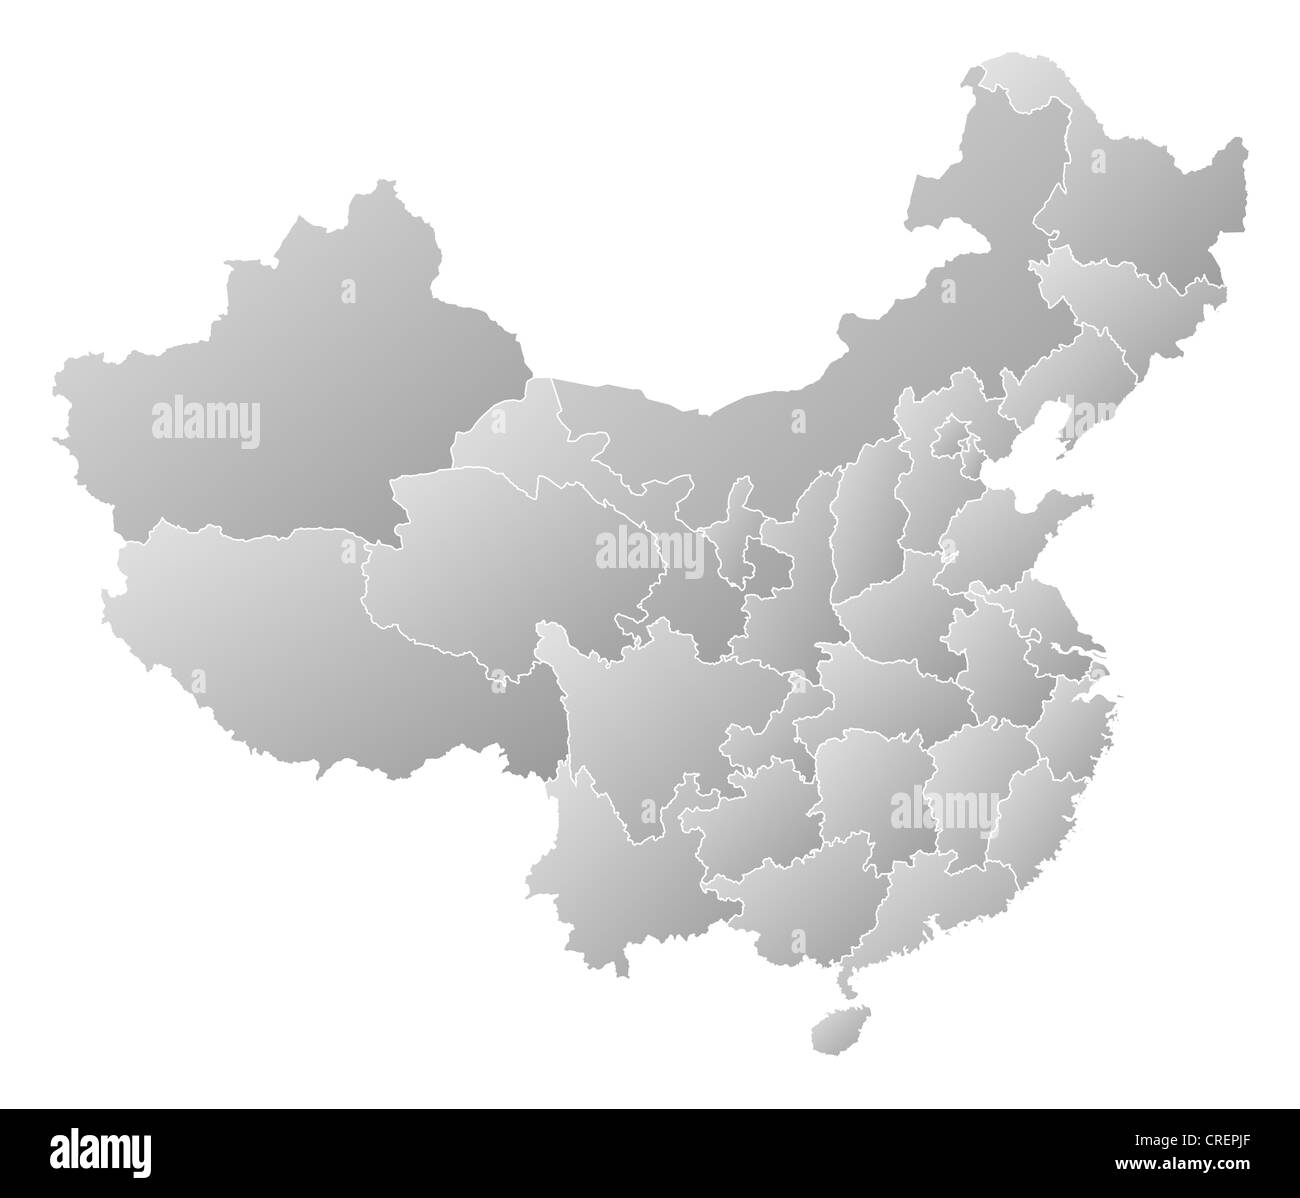 Political map of China with the several provinces. Stock Photo